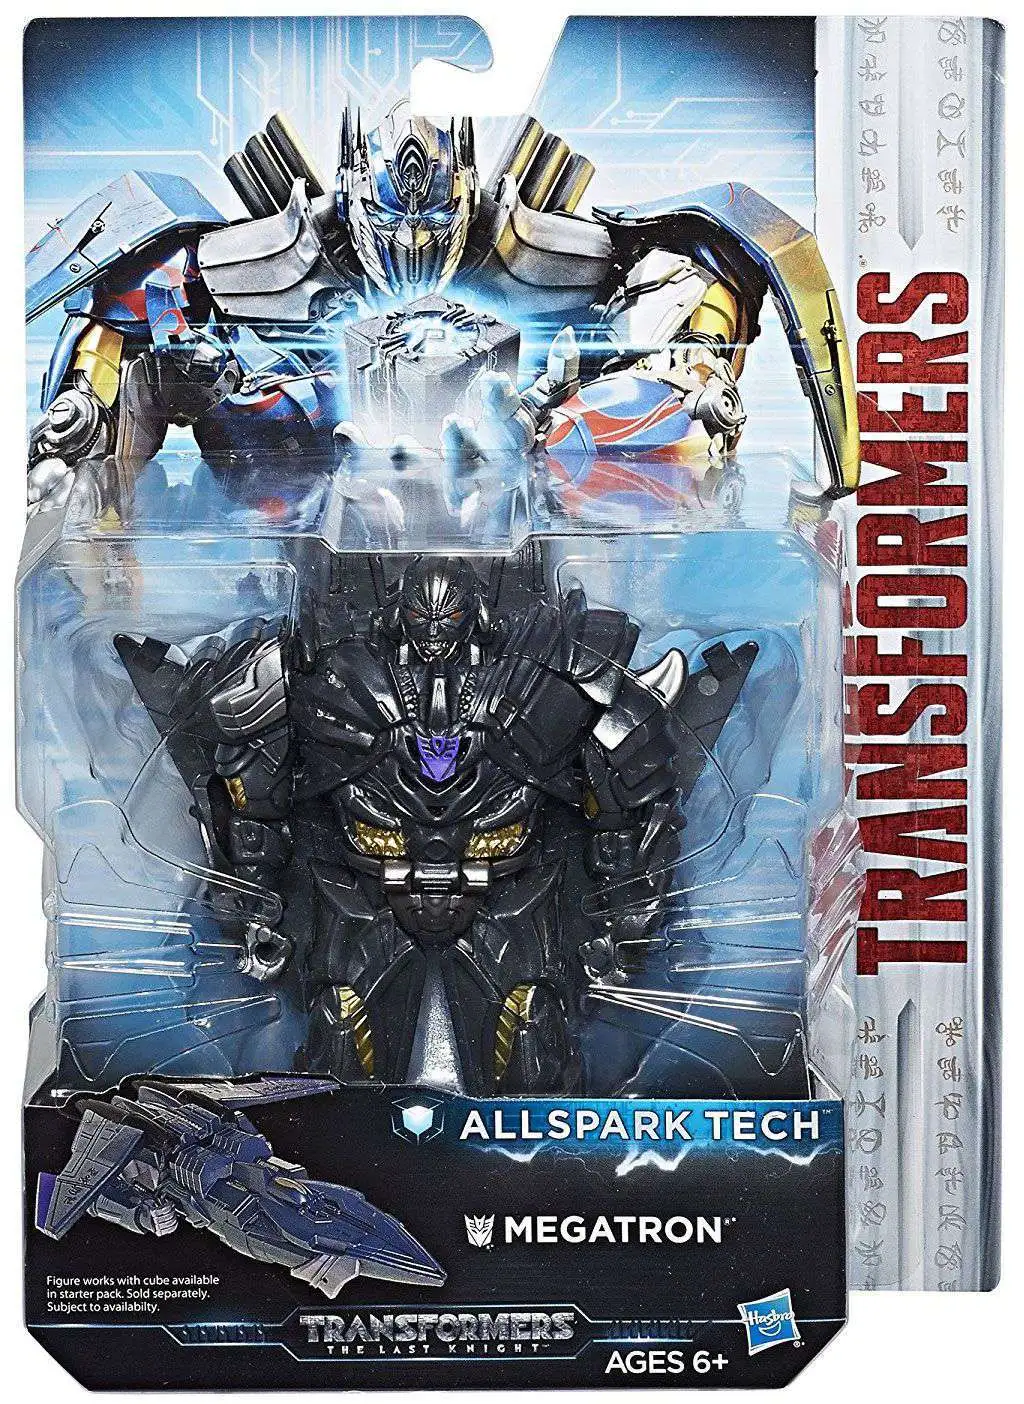 Transformers Allspark Tech Cube Starter Pack AUTOBOT SQWEEKS Figure Toy 